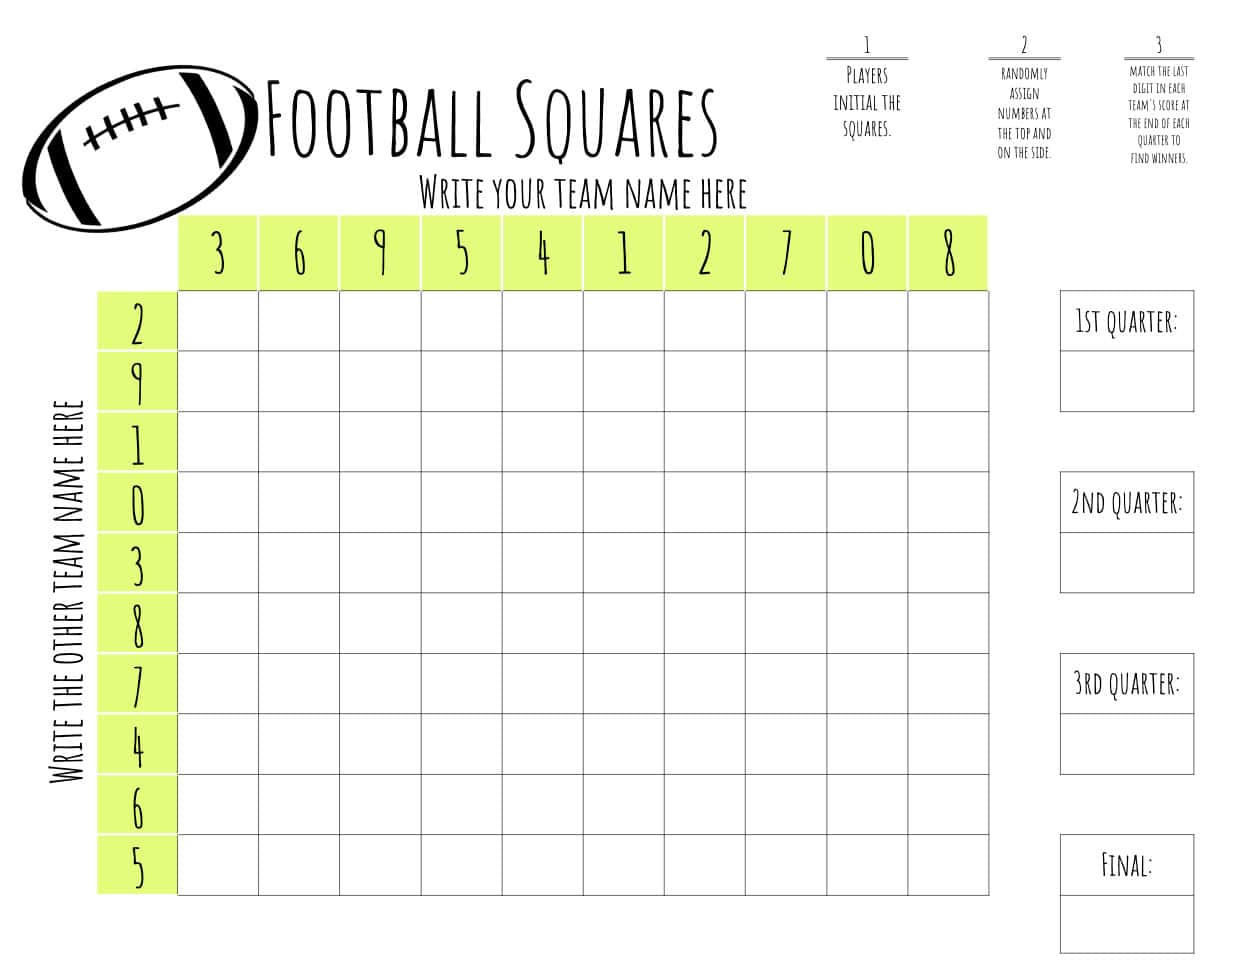 football squares template with numbers randomized.